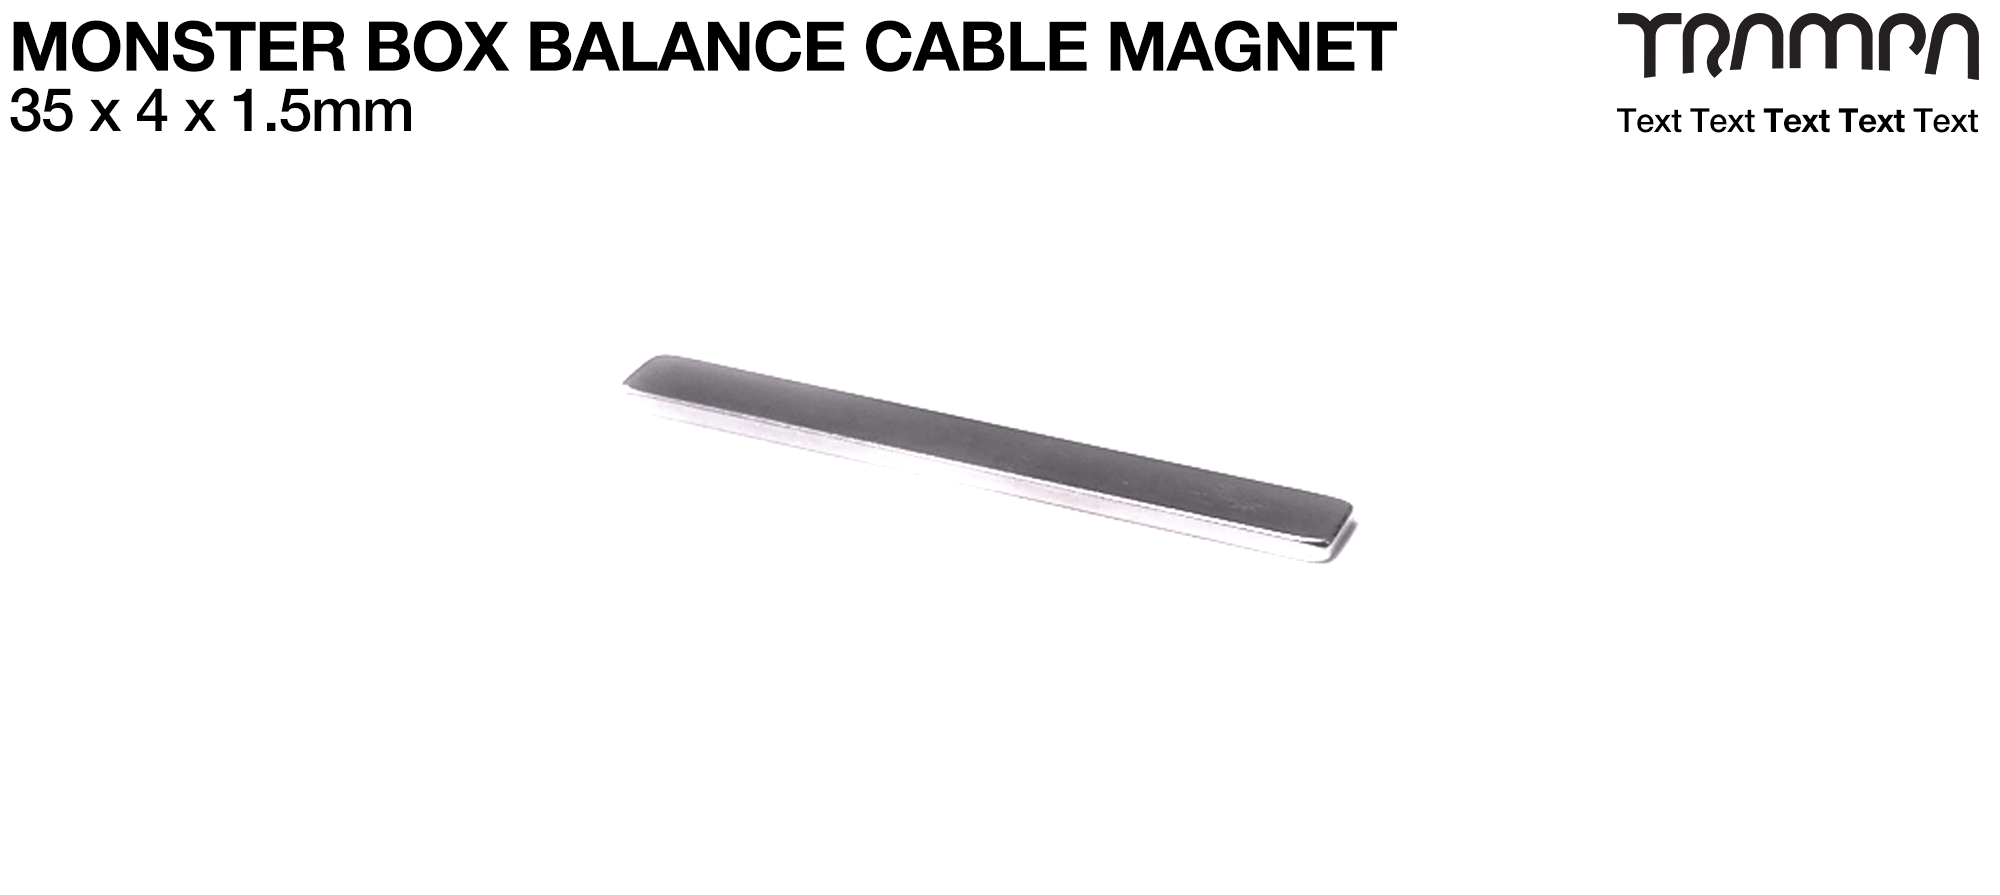 Magnet for Monster Box Balance cables protection 30x 4x 1.5mm N